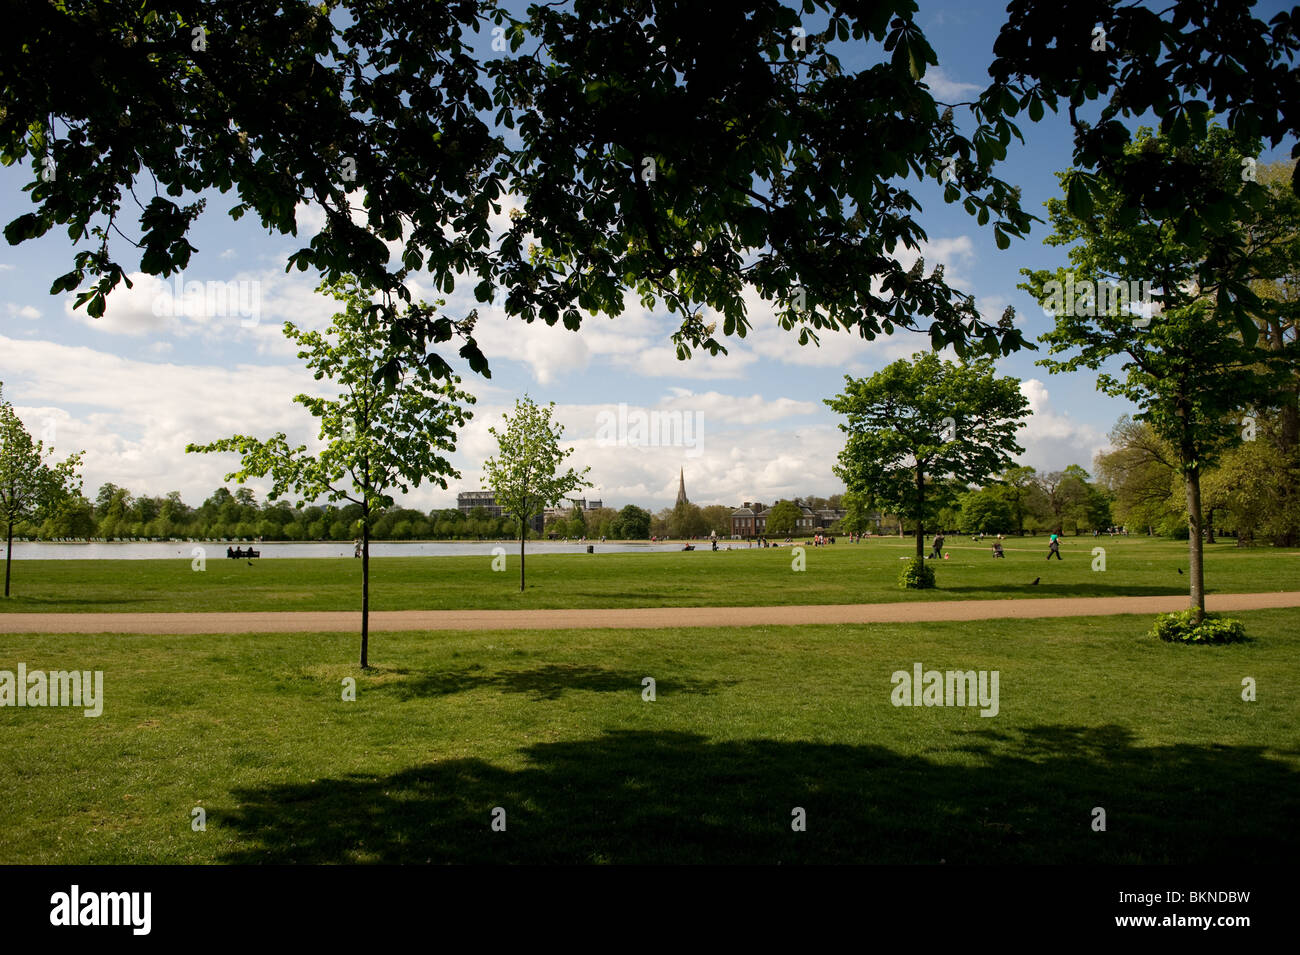 A wide angle view of the Round Pond and Kensington Palace sen from the ...